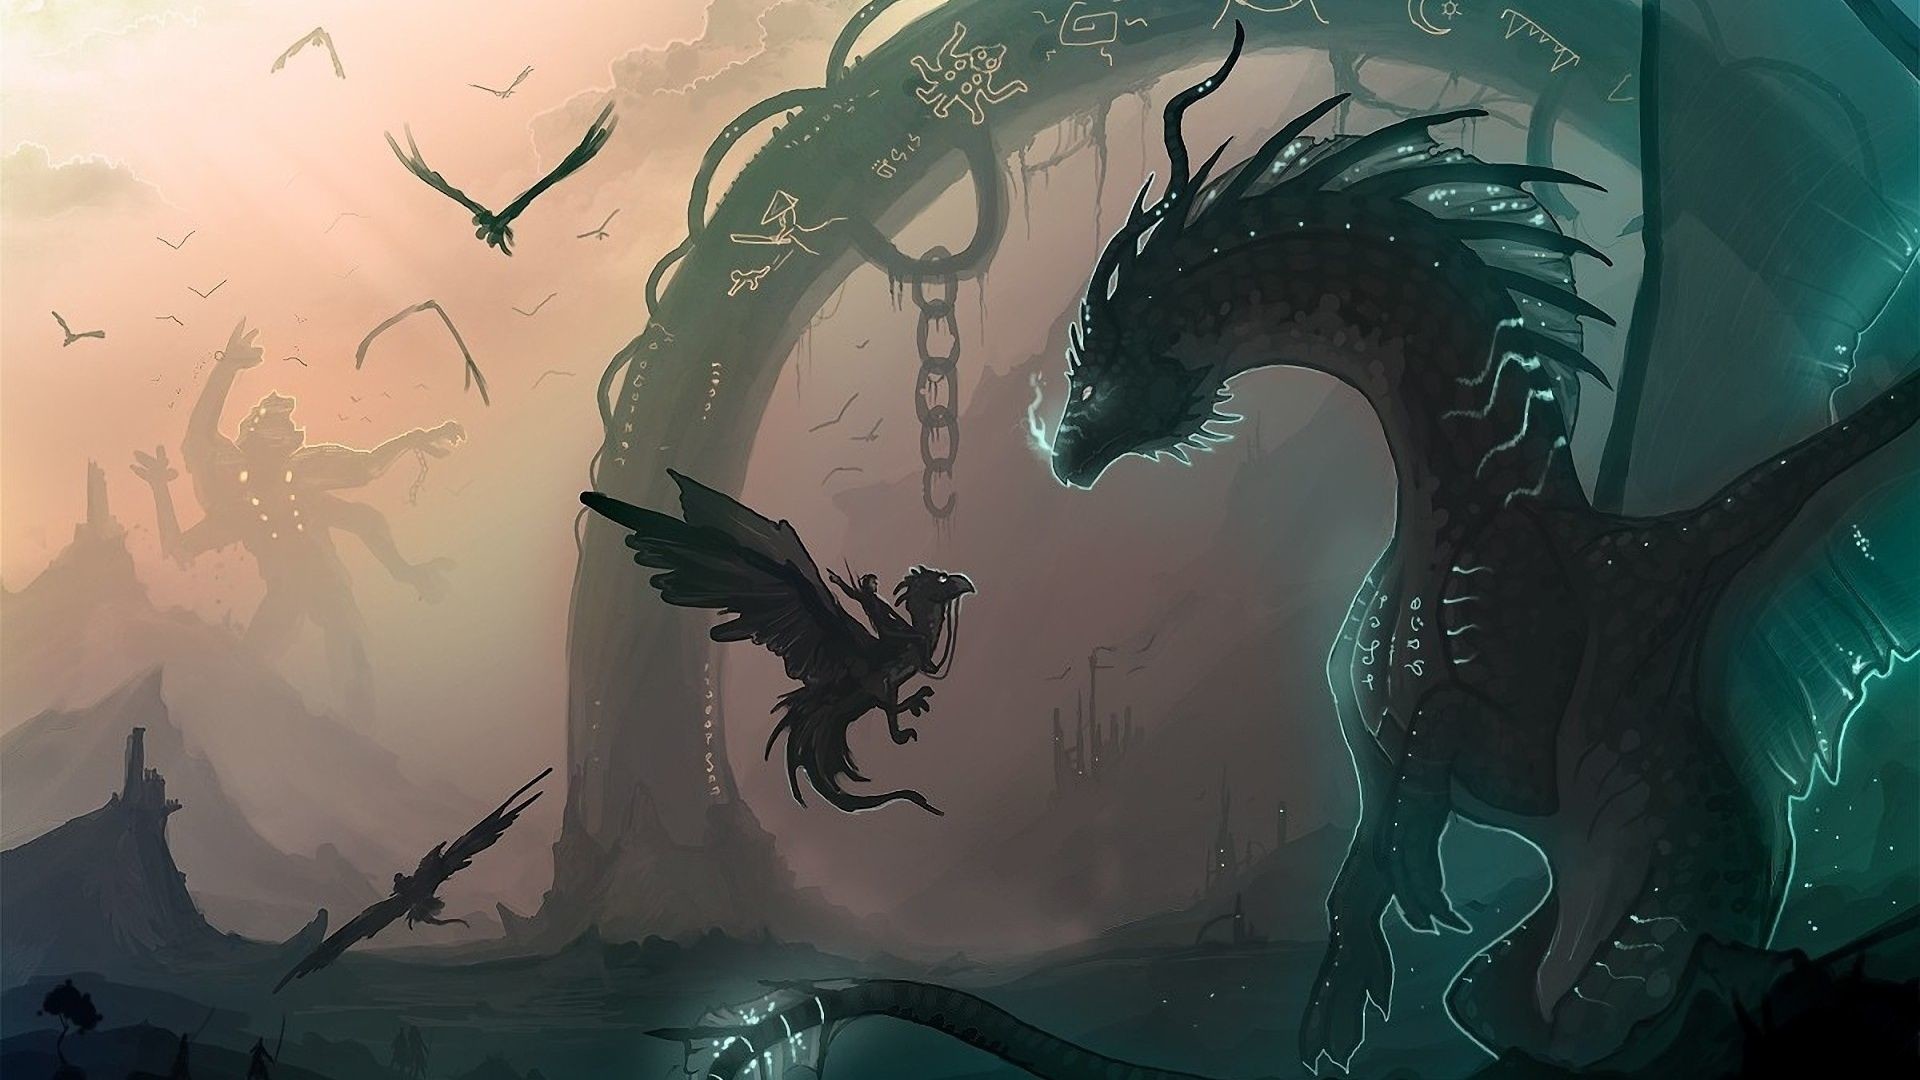 1920x1080 Page 2: Full HD 1080p Dragon Wallpapers HD, Desktop Backgrounds .